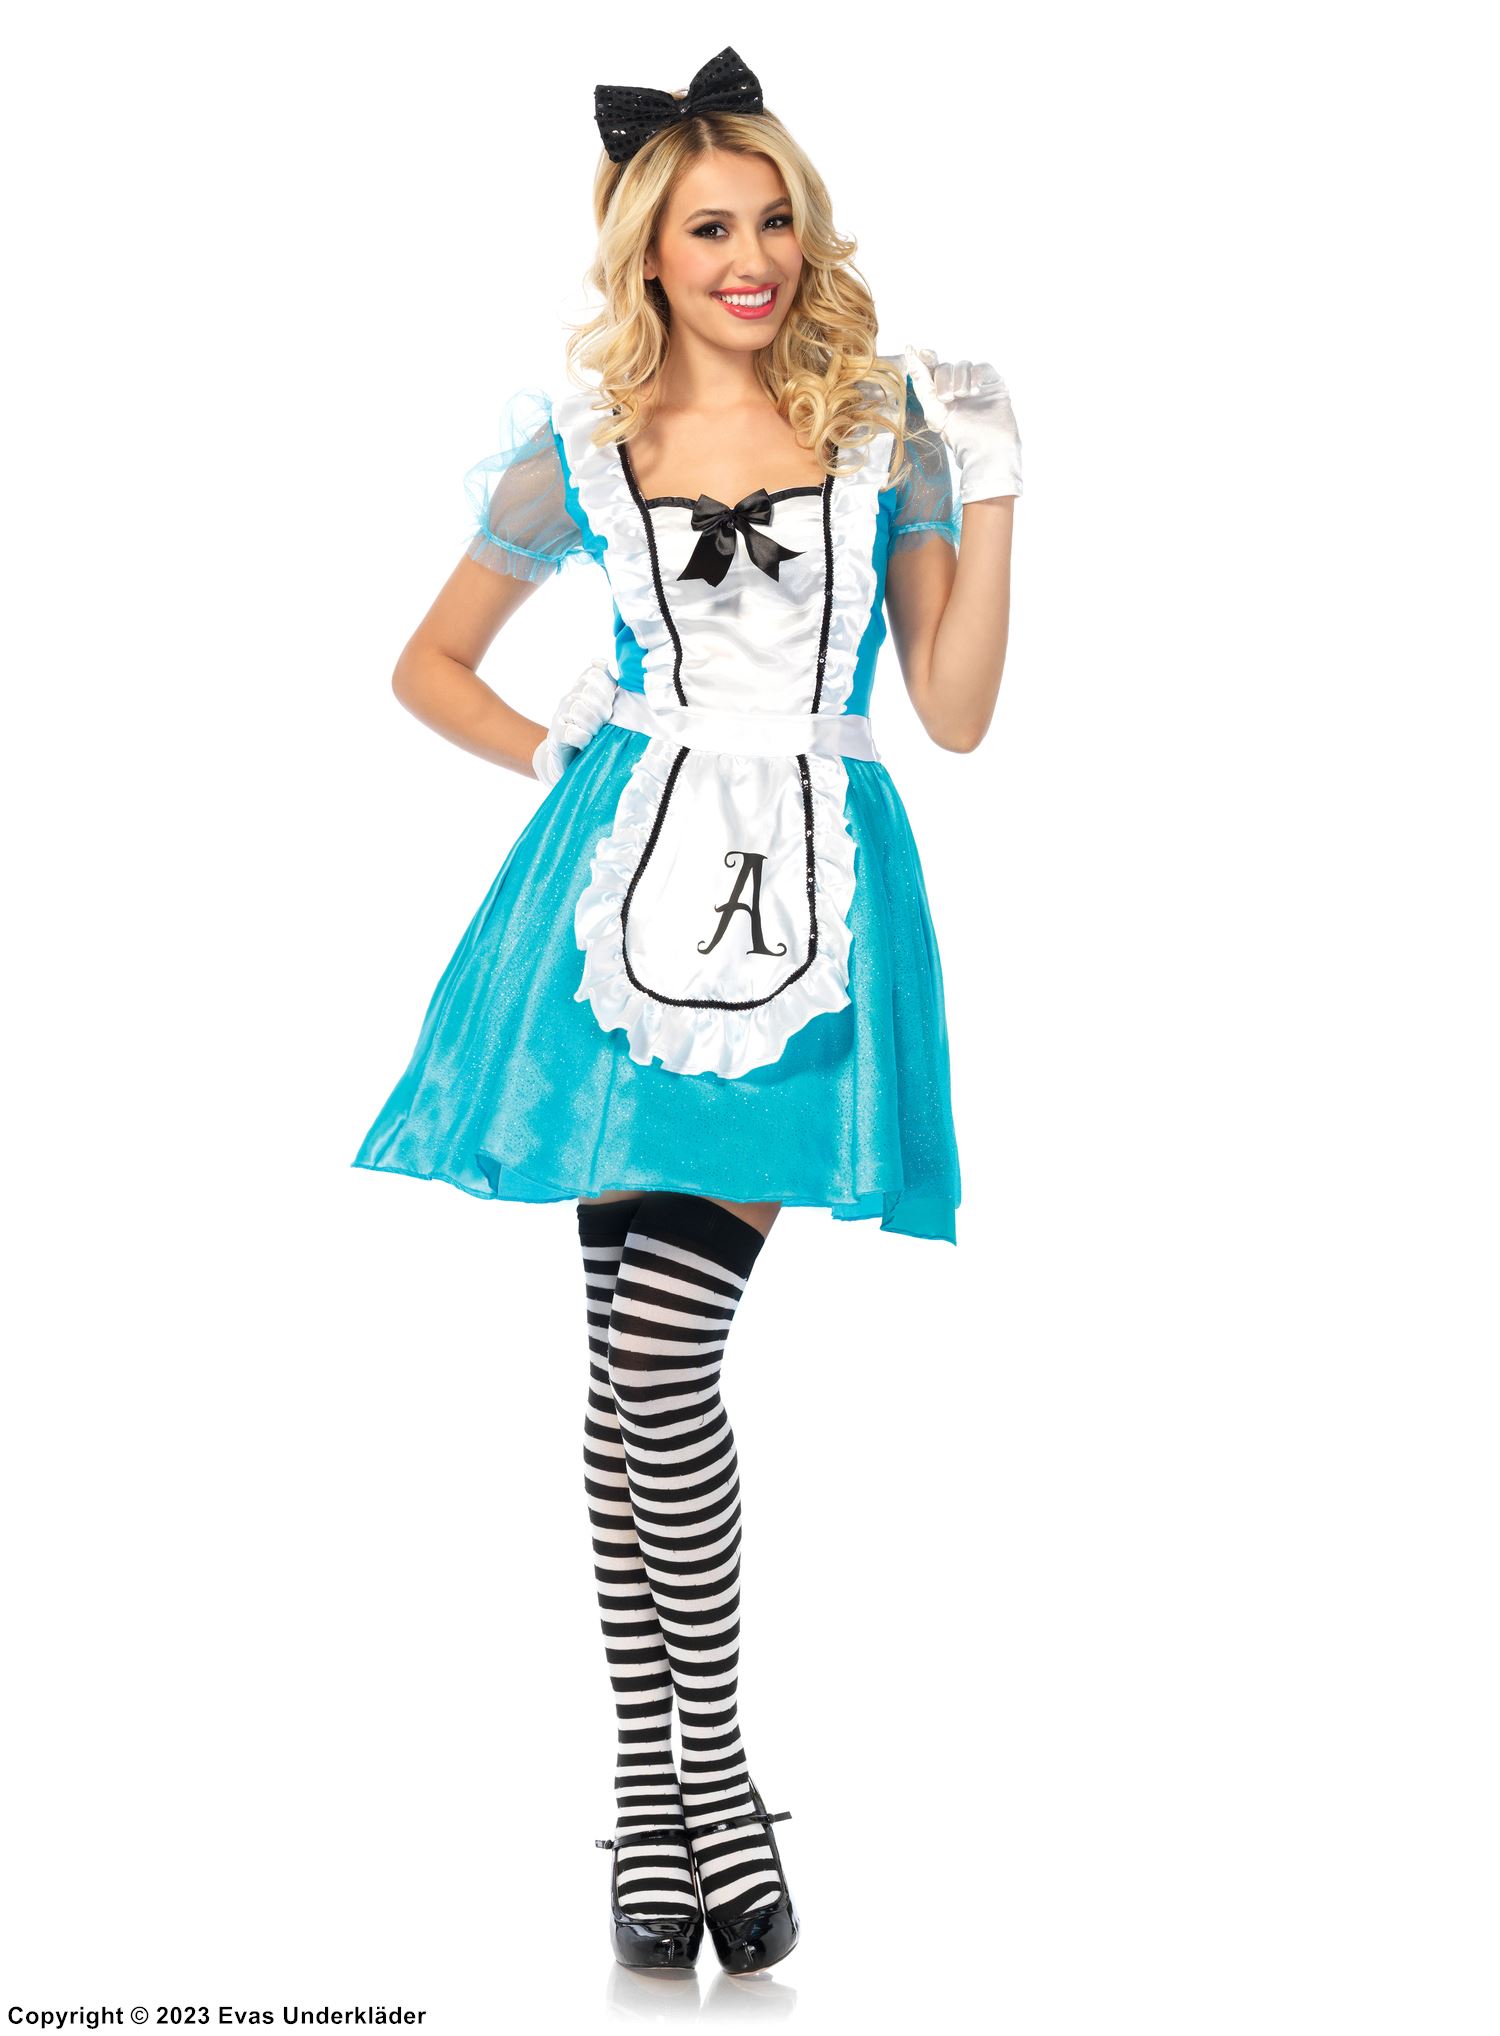 Alice in Wonderland, costume dress, bow, apron, puff sleeves